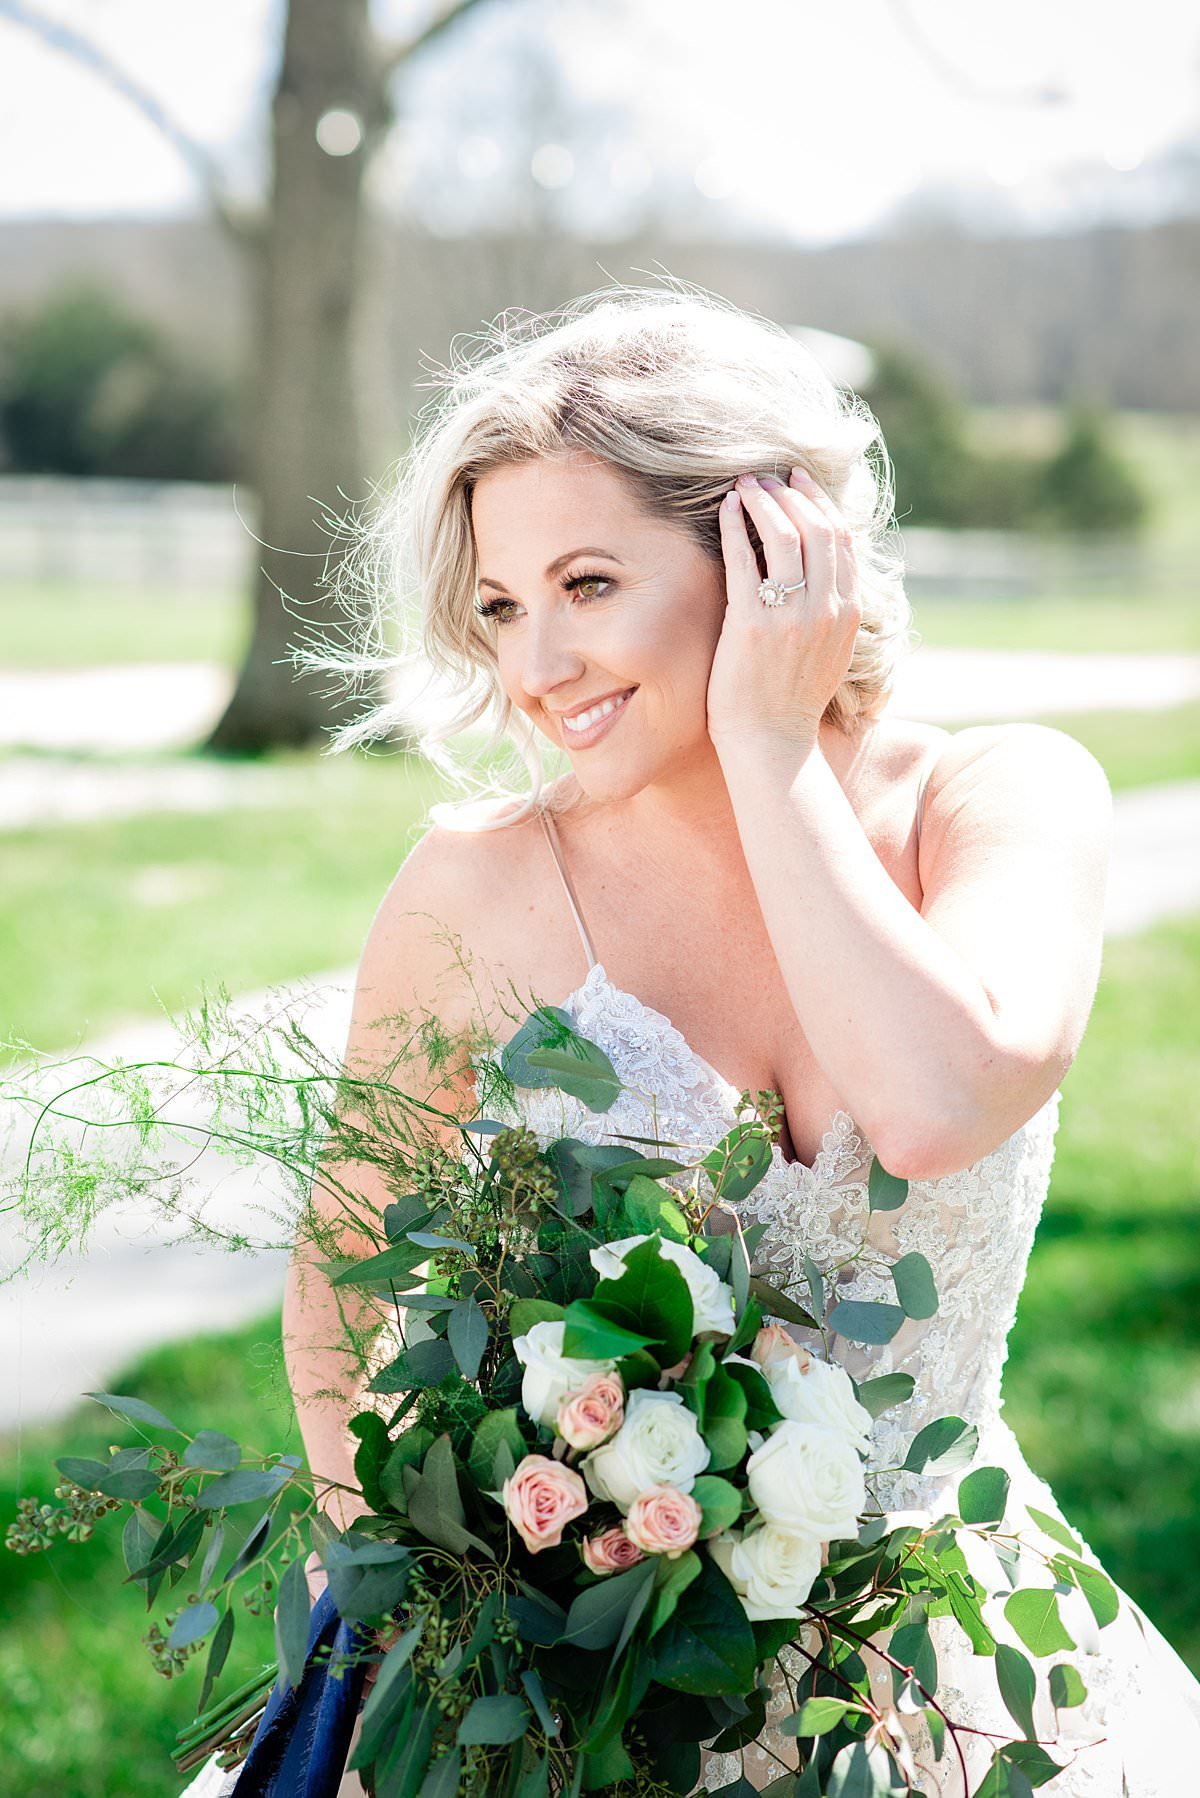 Blond bride holding hair back during breeze while holding large bouquet with heavy greenery